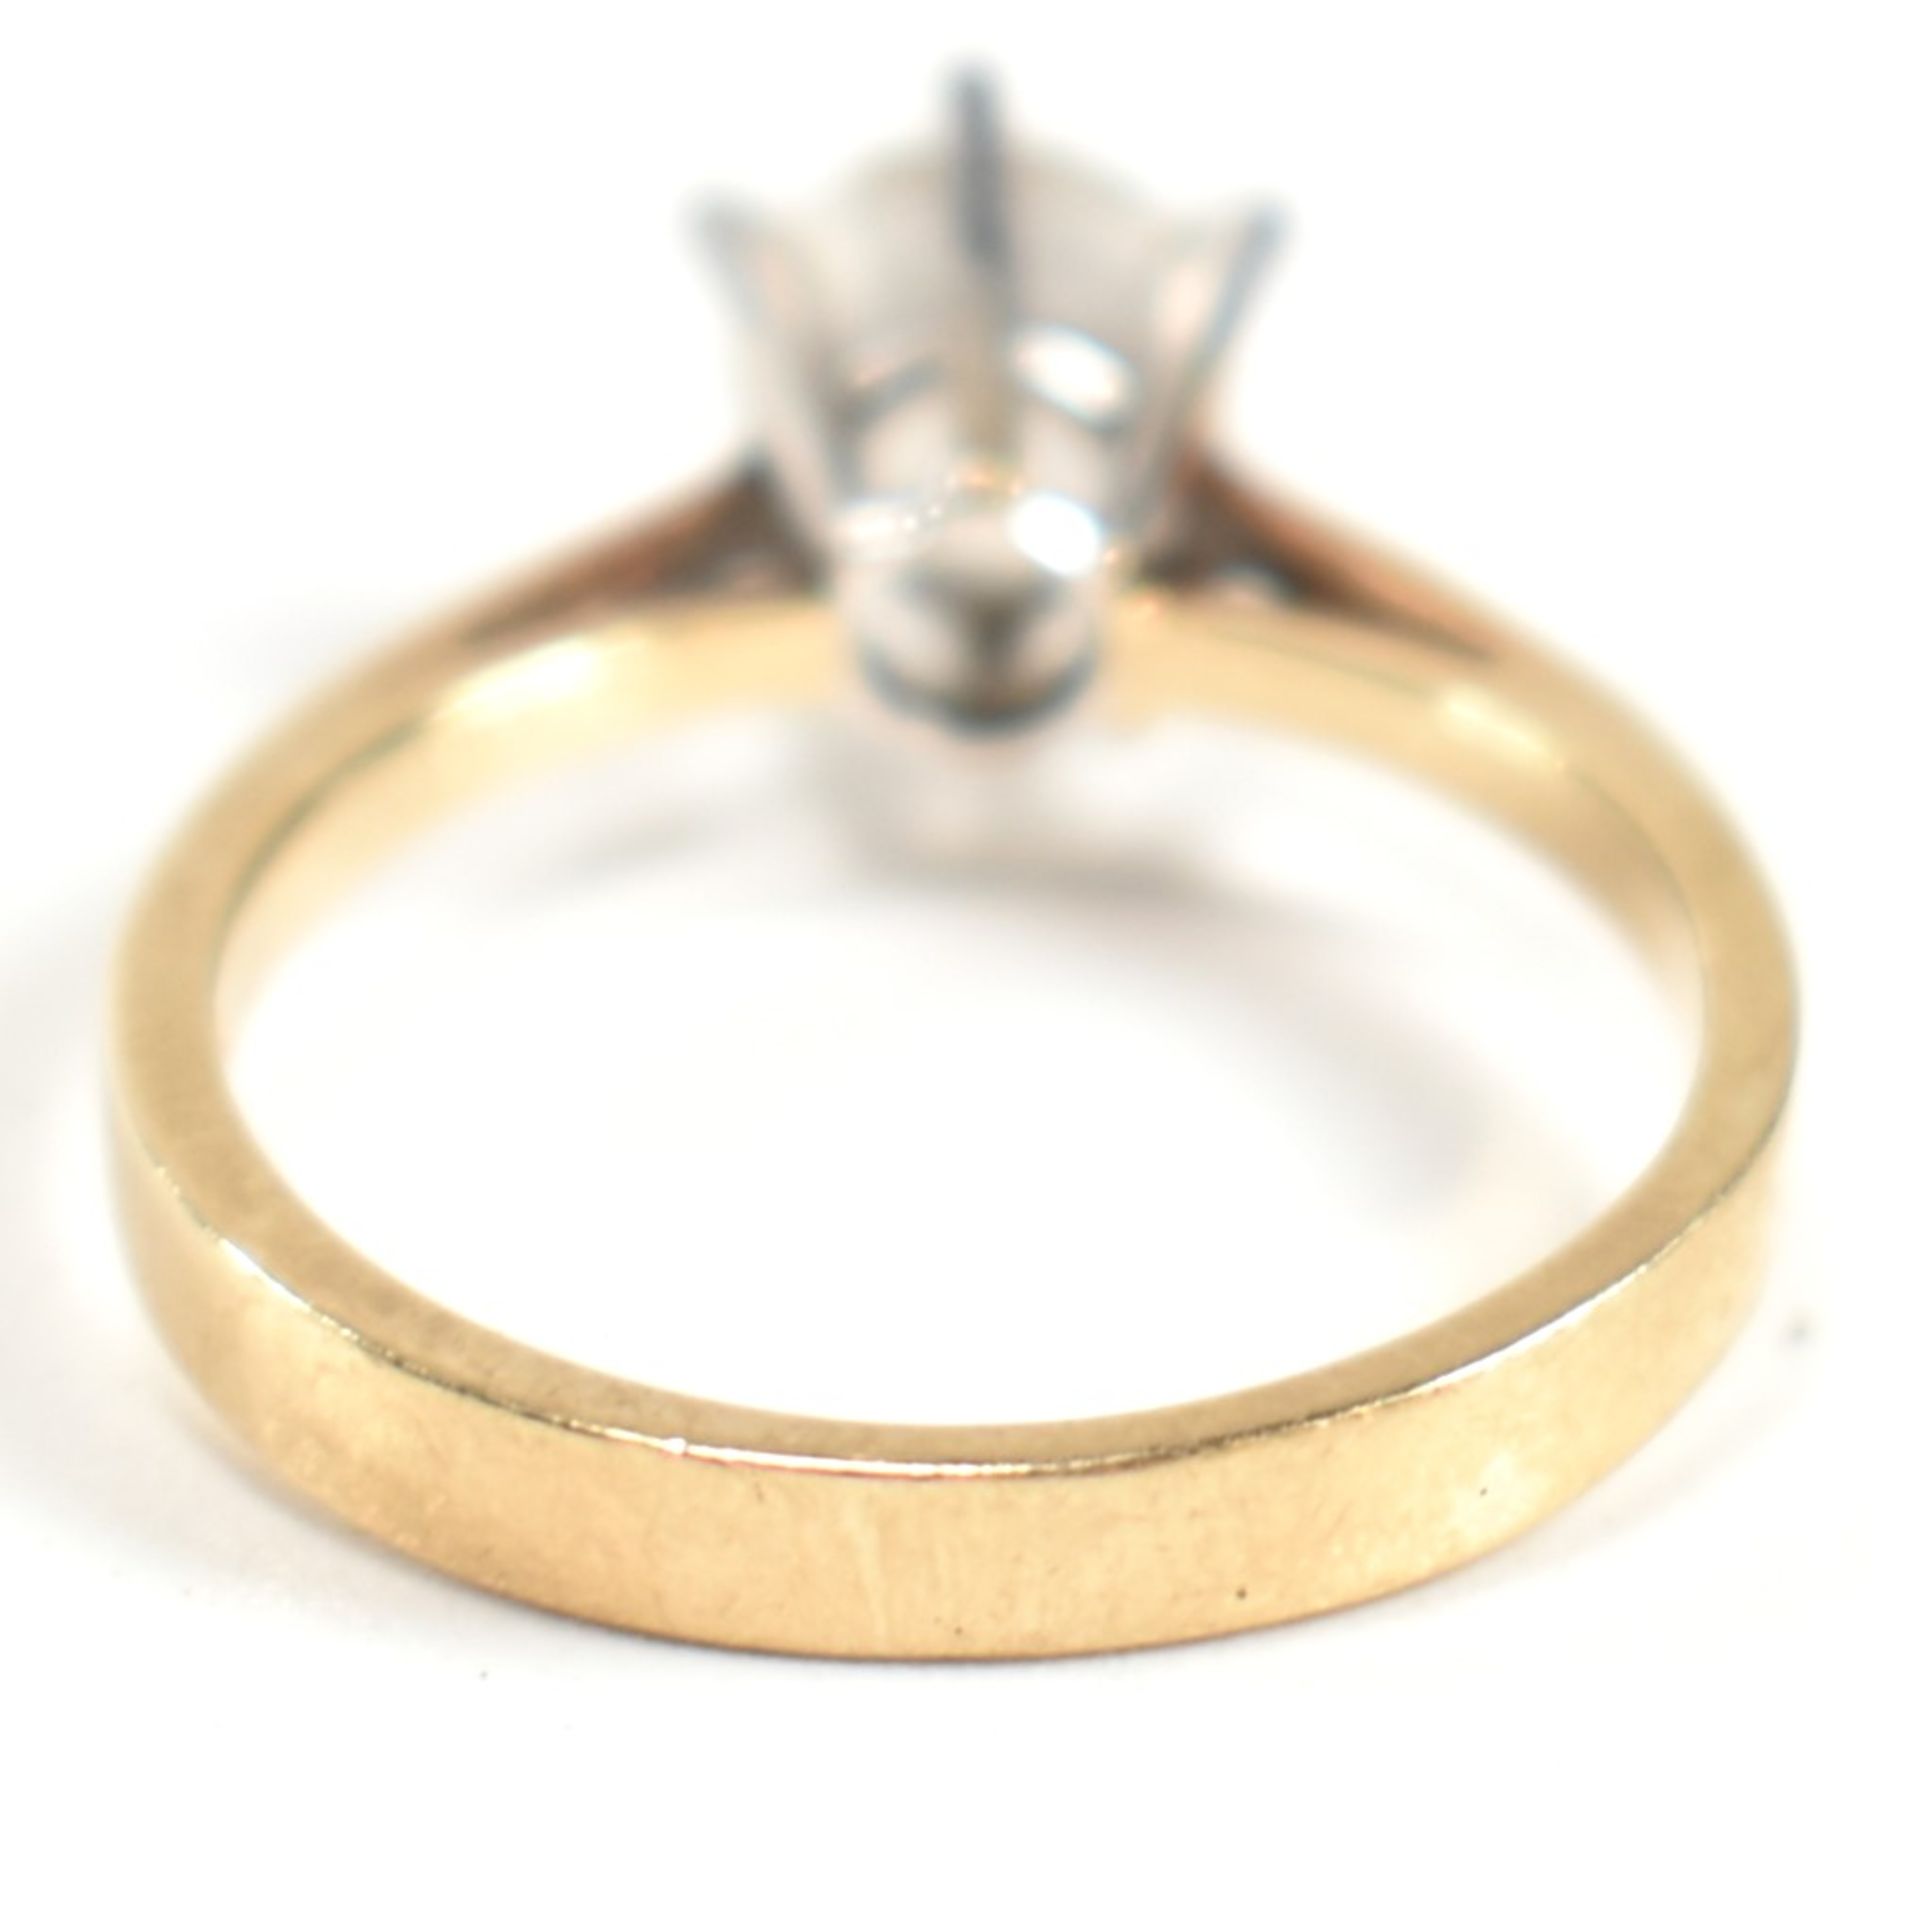 HALLMARKED 9CT GOLD & CZ SOLITAIRE RING - Image 2 of 8